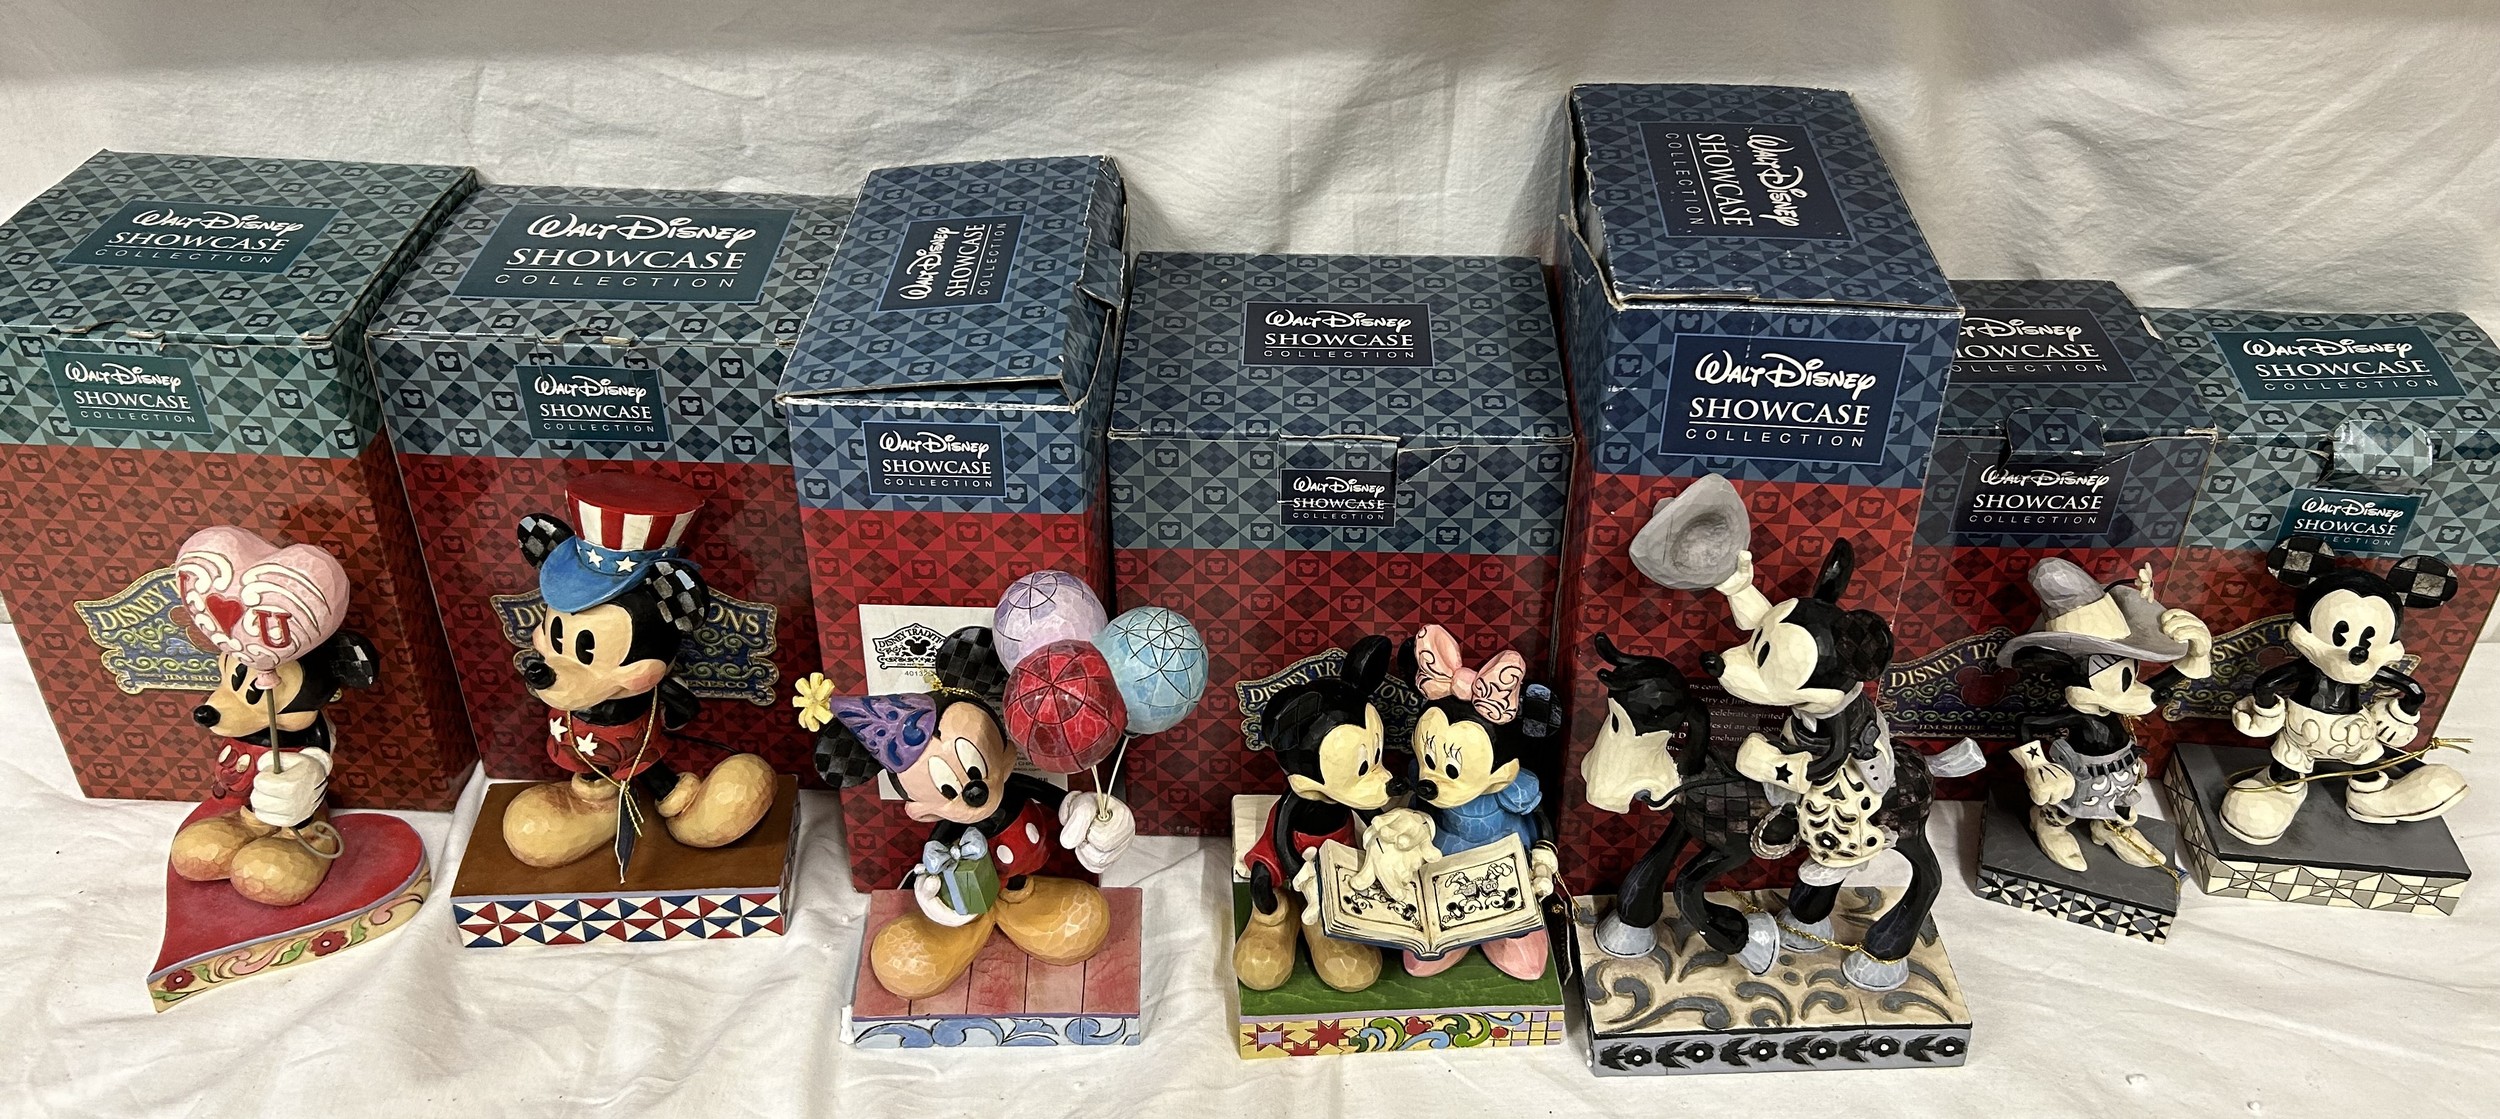 A Selection of 7 'Walt Disney SHOWCASE collection figurines all boxed, to include - Mickey with